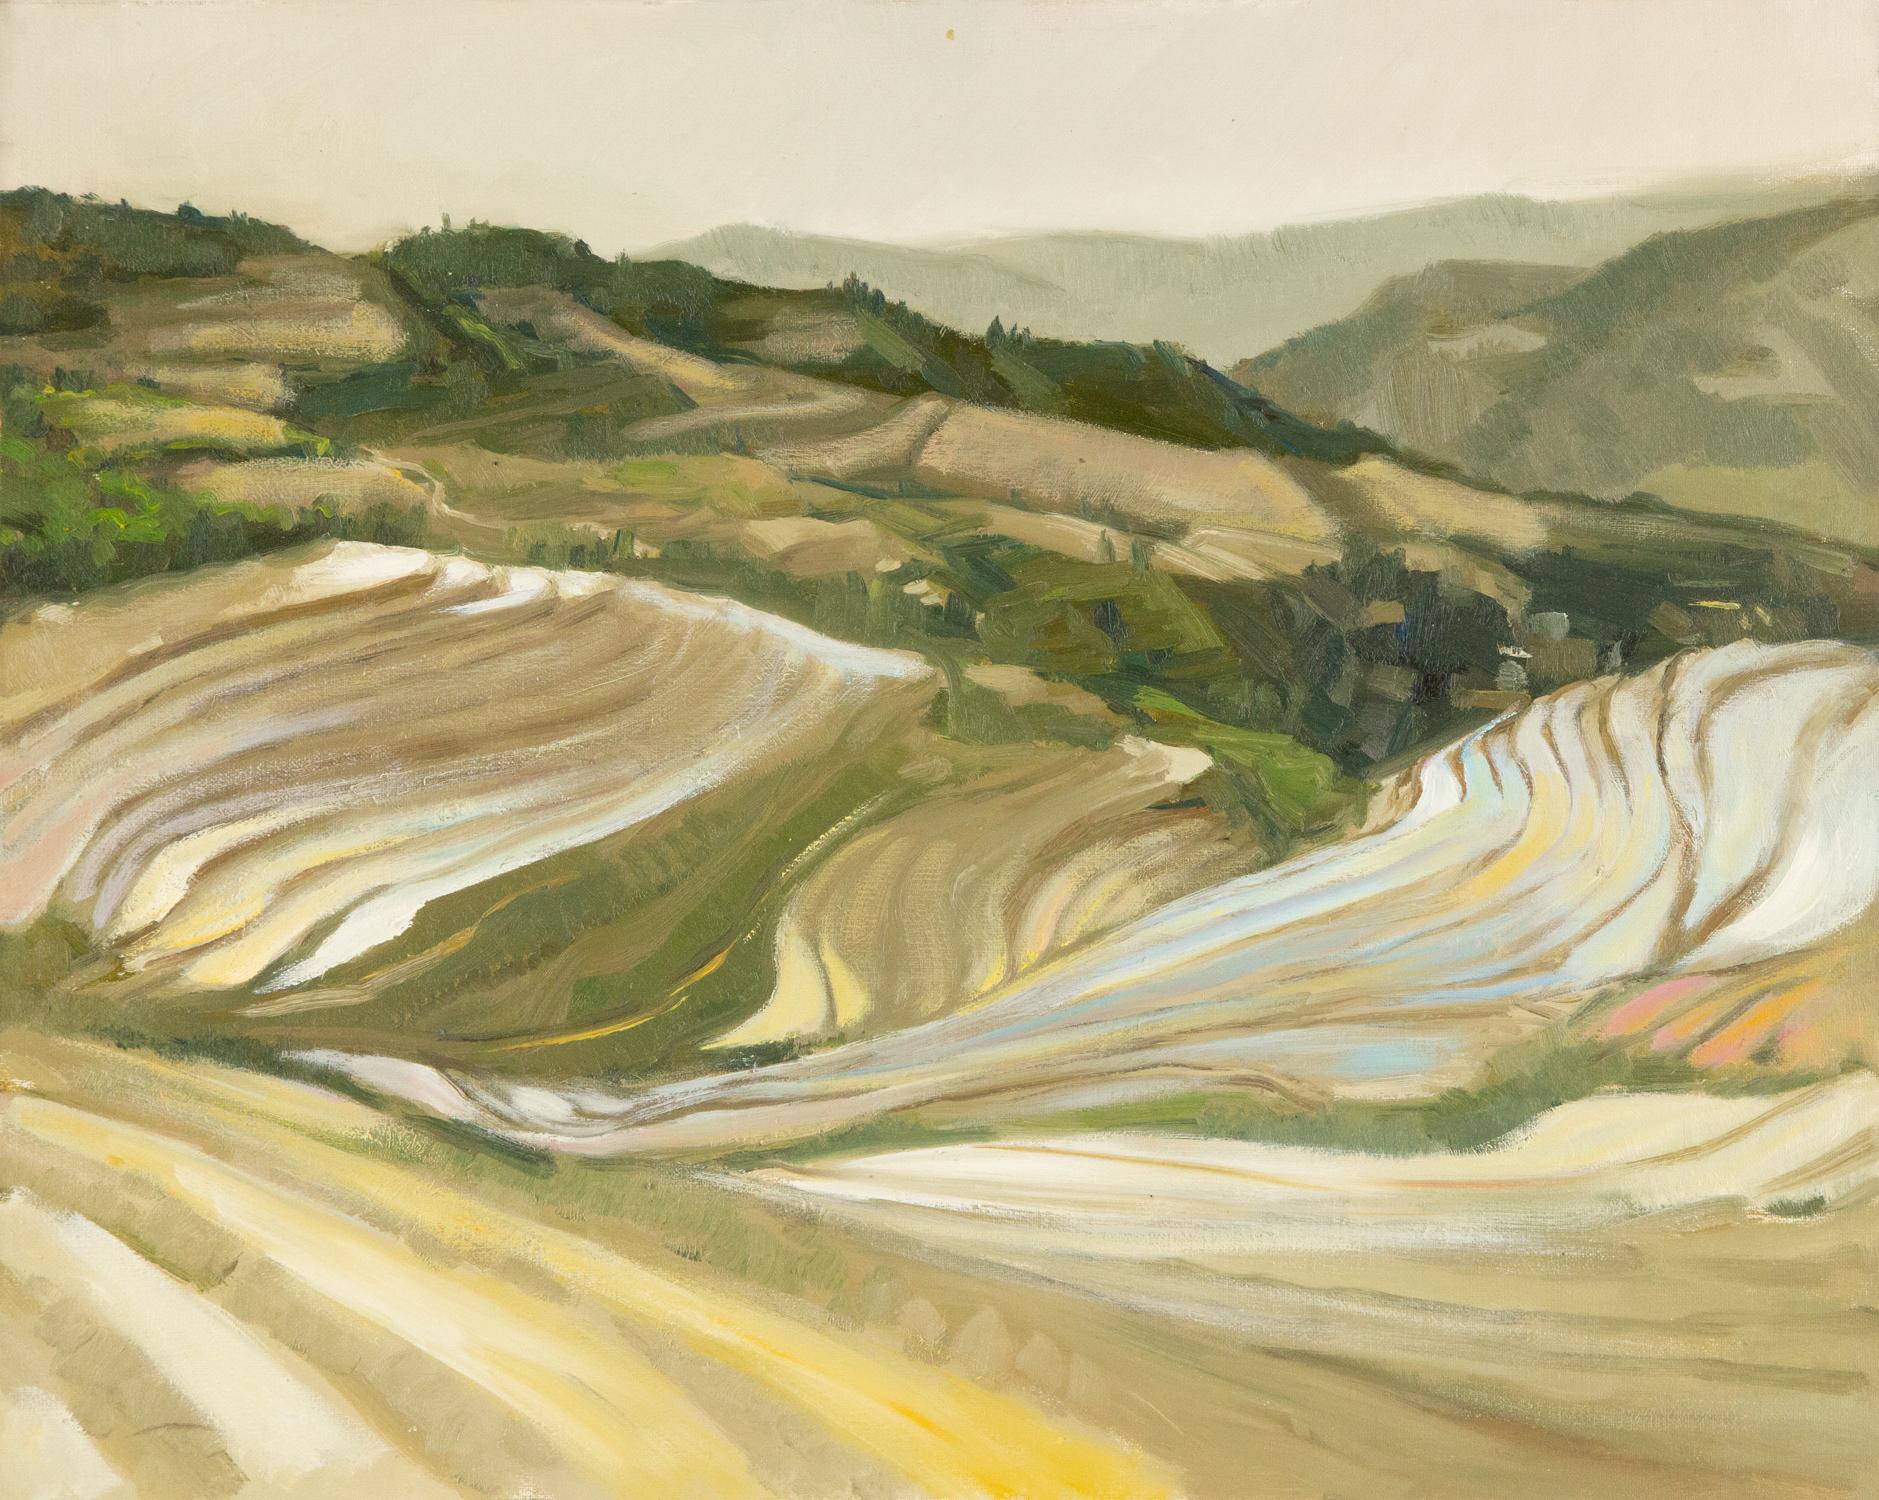 Title: Terraces
Medium: Oil on canvas
Size: 15.5 x 19 inches
Frame: Framing options available!
Condition: The painting appears to be in excellent condition.
Note: This painting is unstretched
Year: 2000 Circa
Artist: Huang Dongxing
Signature: